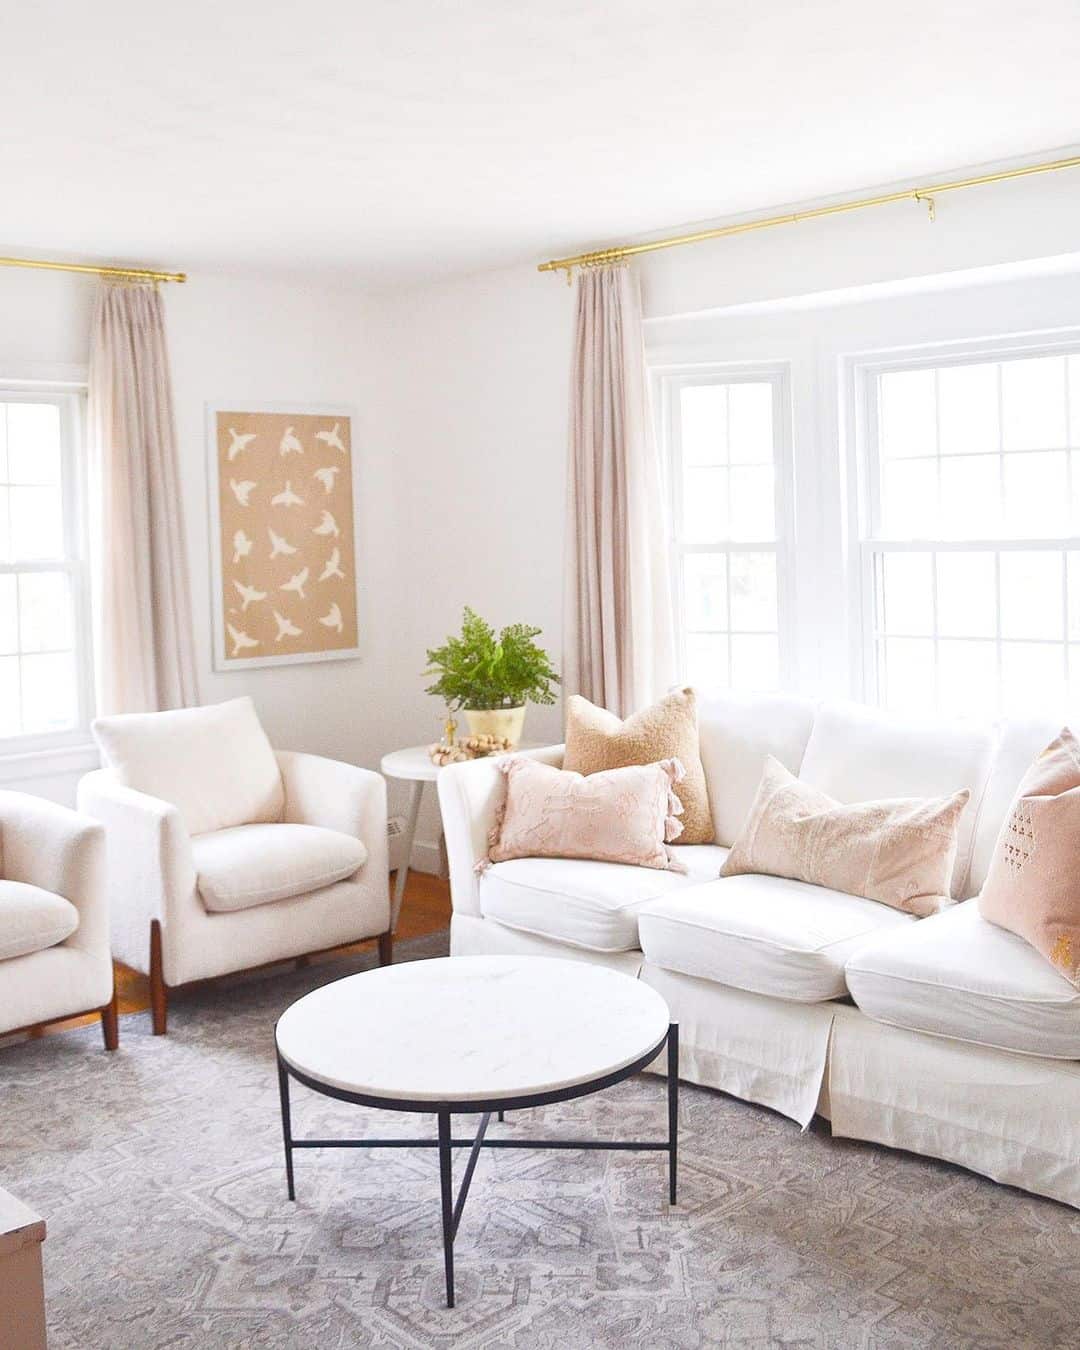 Cozy Ivory Living Room With Cream Colored Chairs - Soul & Lane